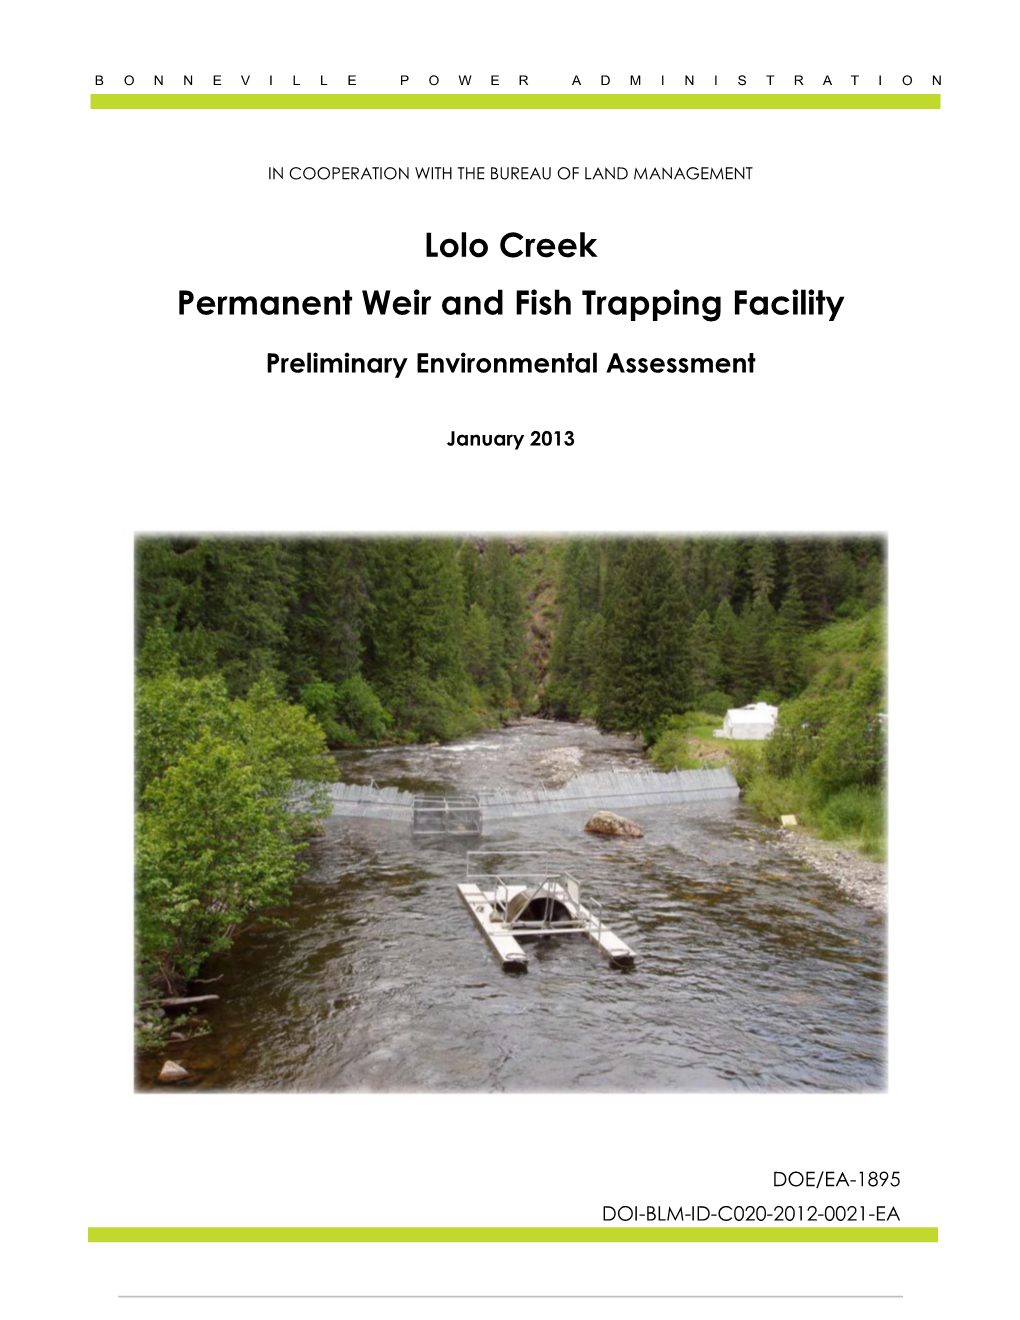 Lolo Creek Permanent Weir and Fish Trapping Facility